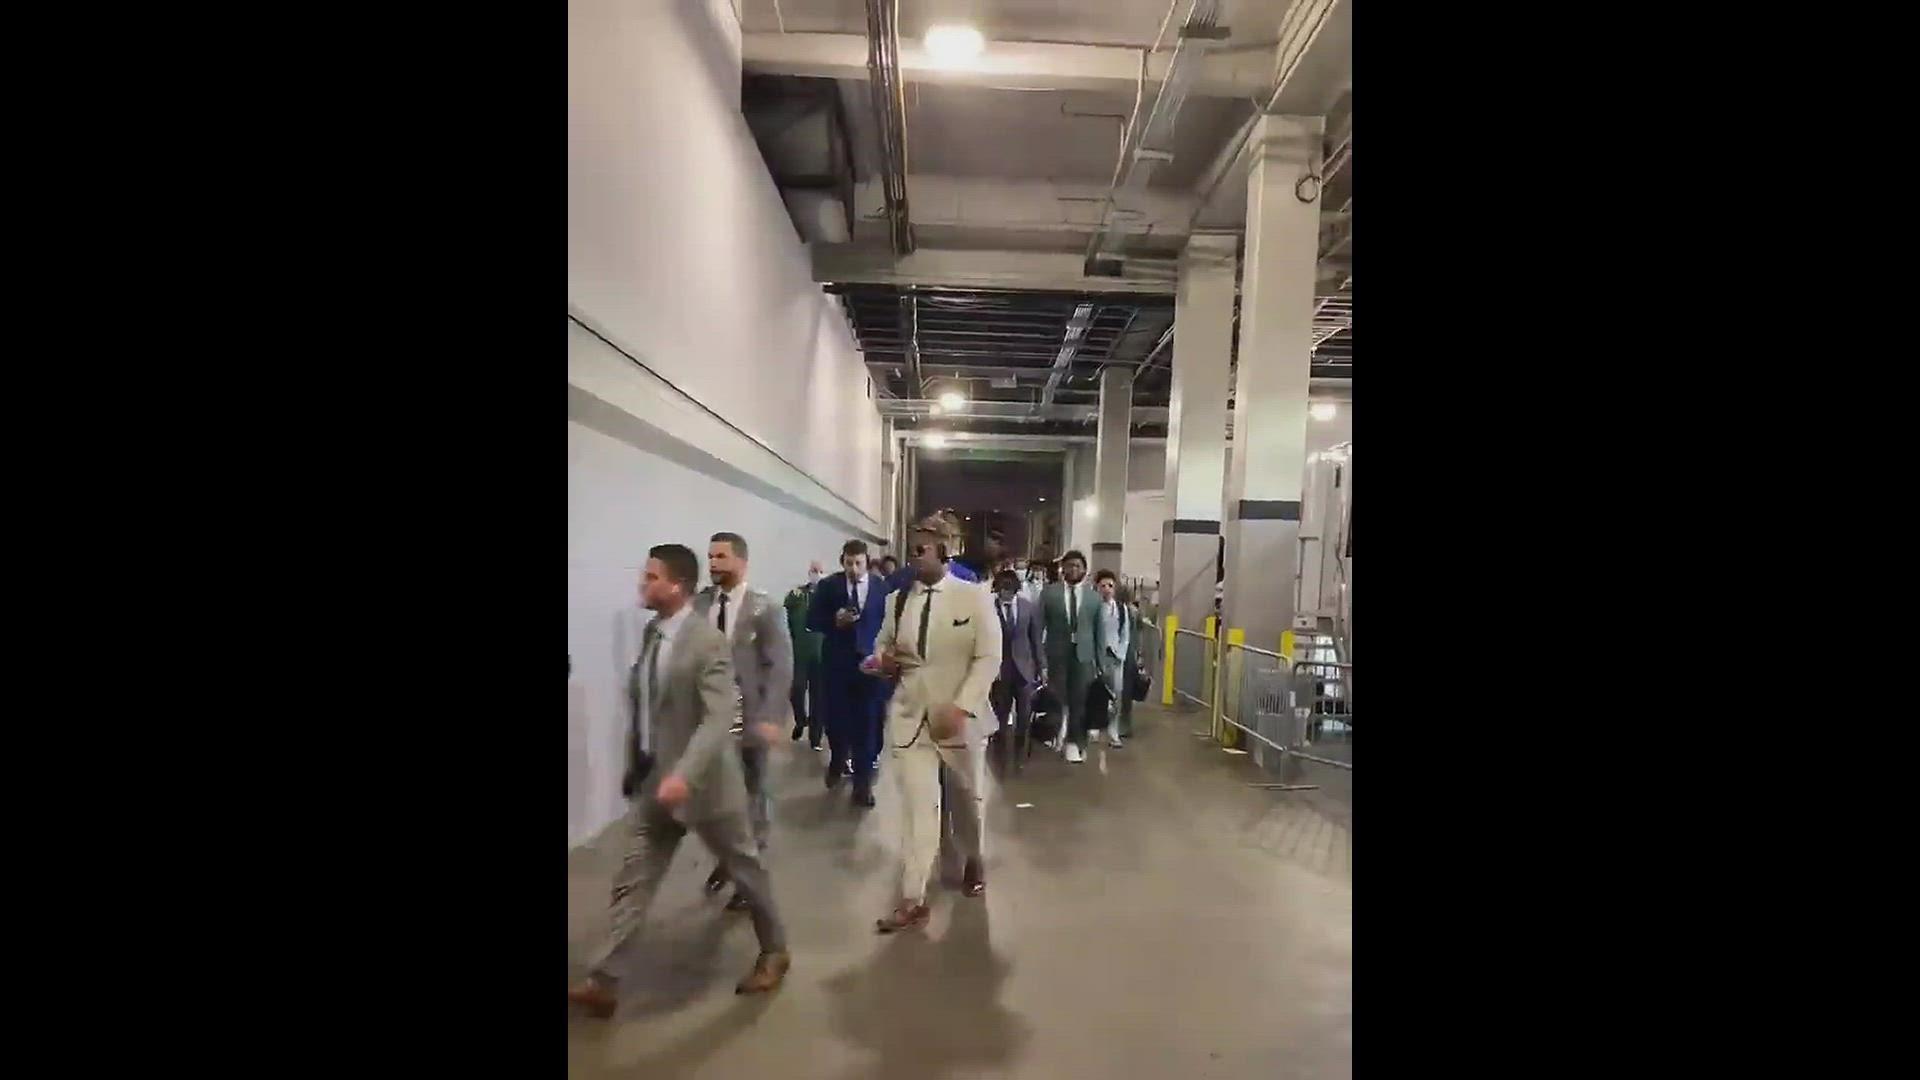 Baylor Bears arrive to Superdome for the Sugar Bowl. 

Credit: Matt Lively